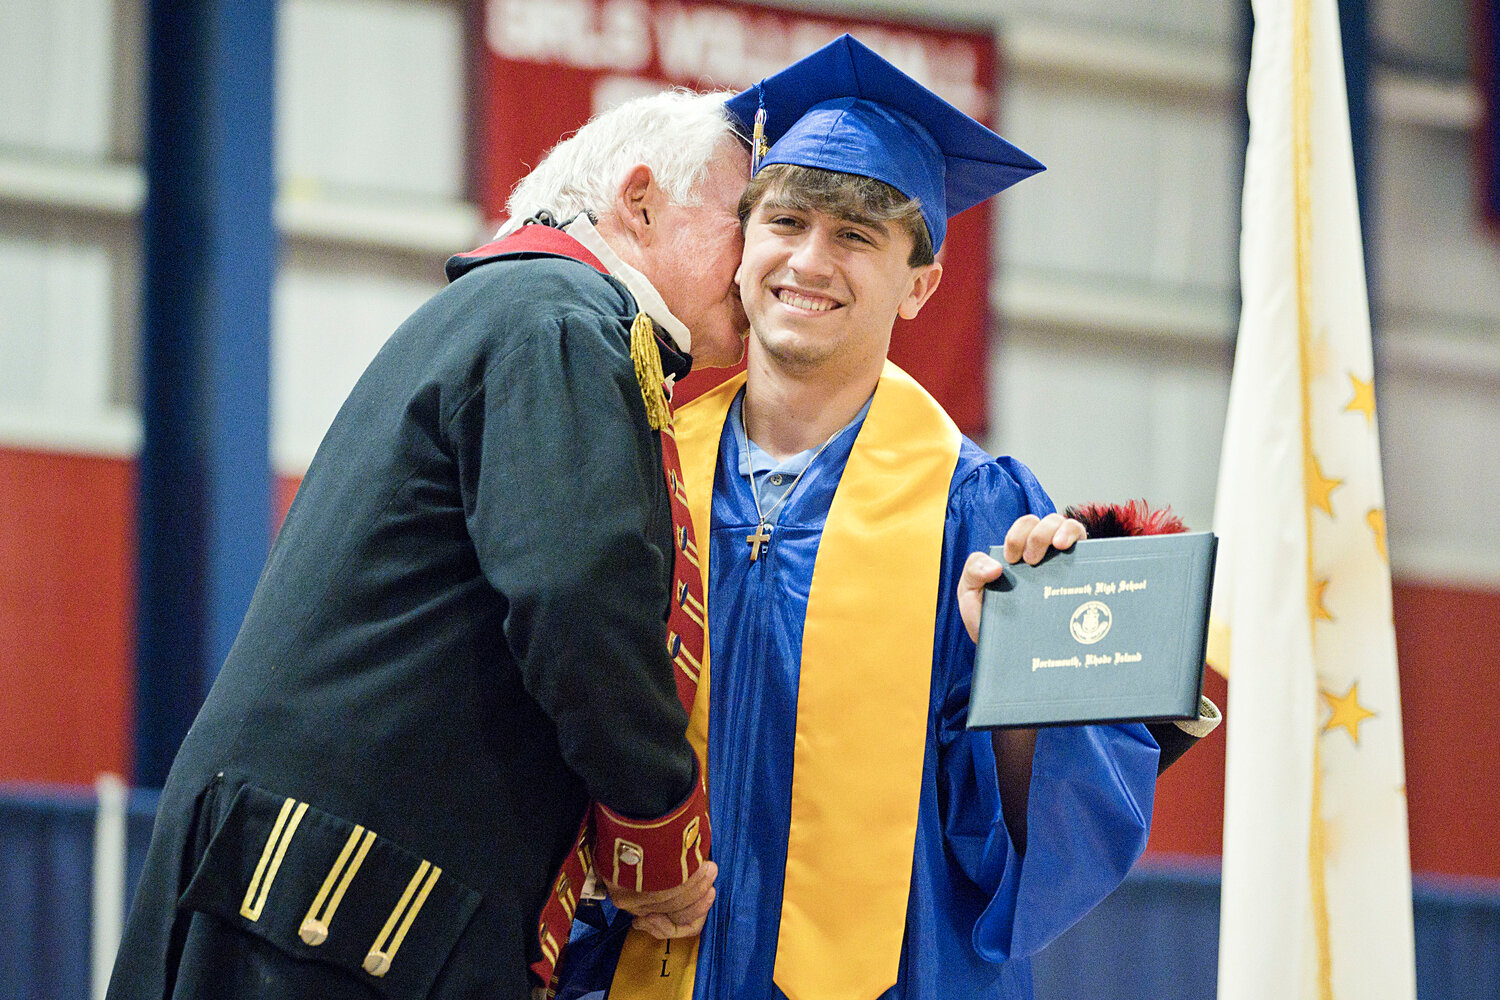 “Patriot” Robert Edenbach gives Andrew Alvanas a hug after presenting him with his diploma.